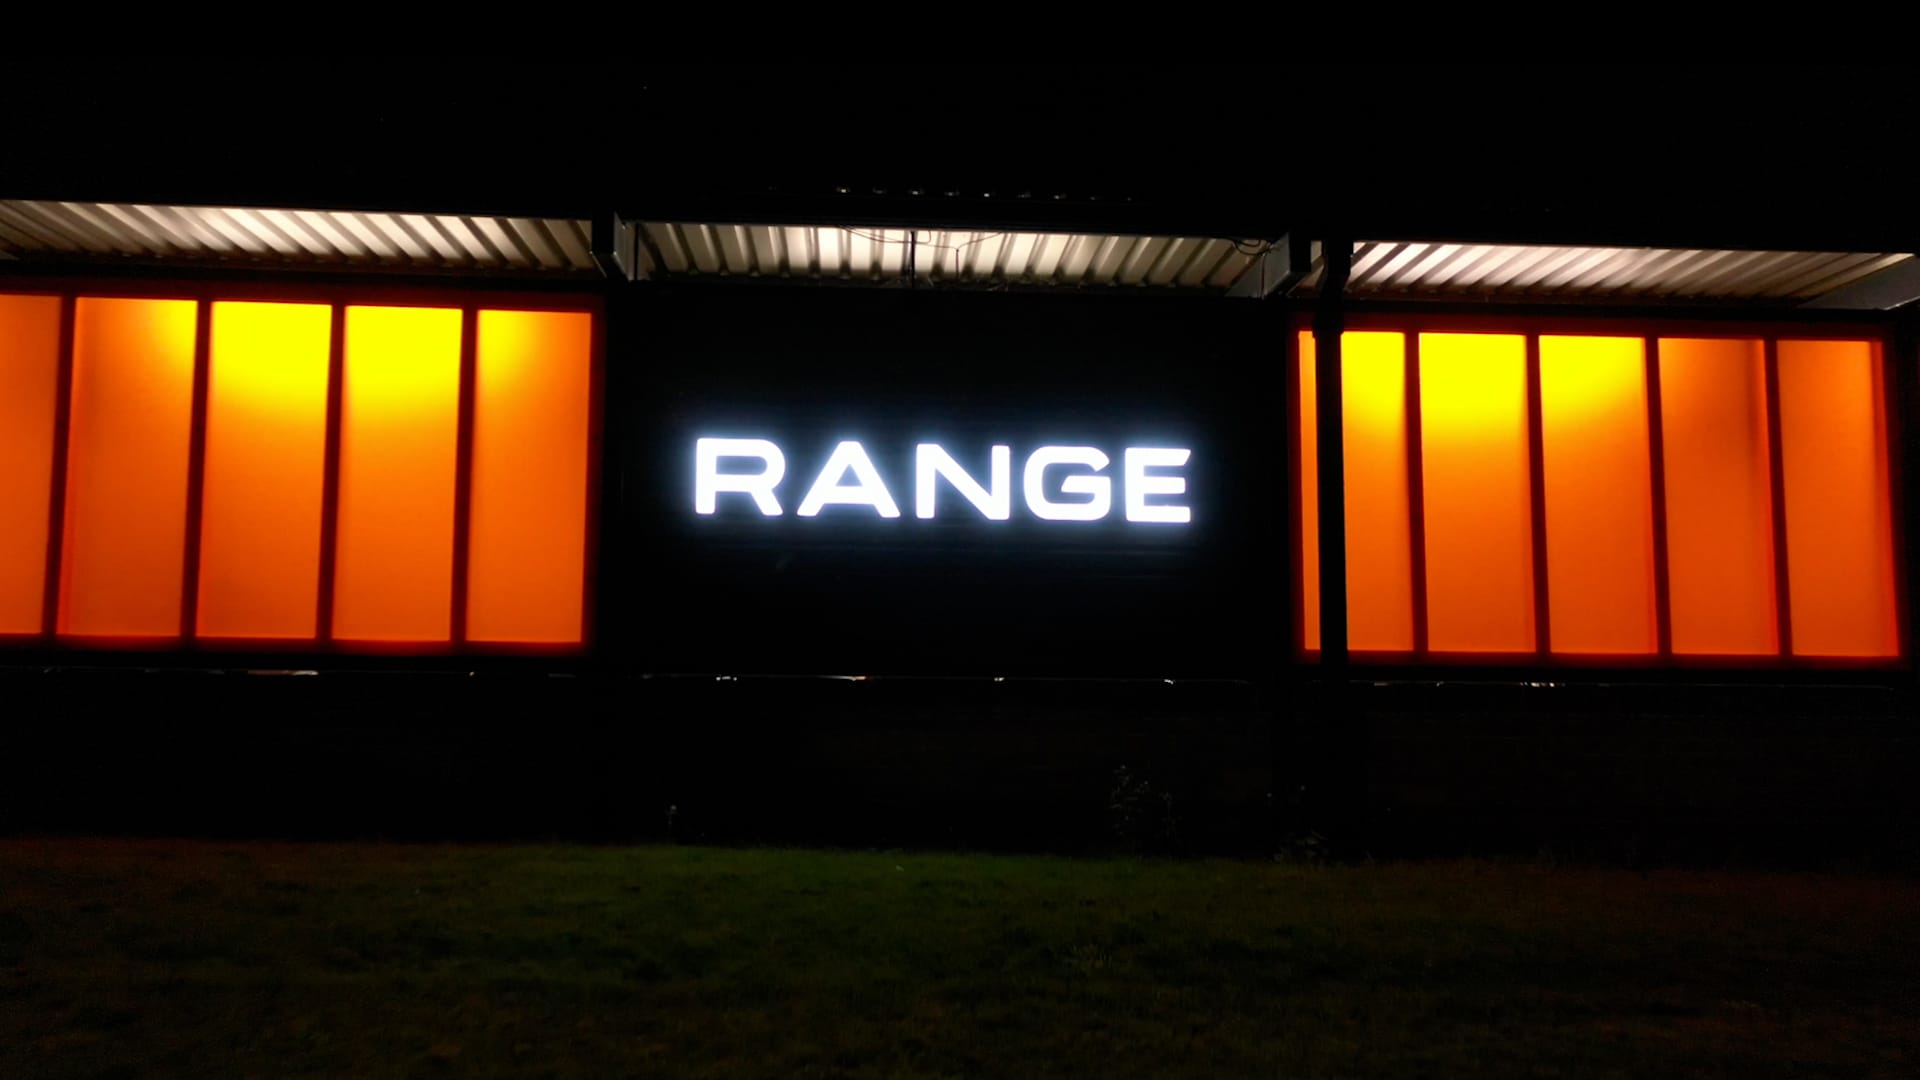 The "Range" sign at Ramsdale Park